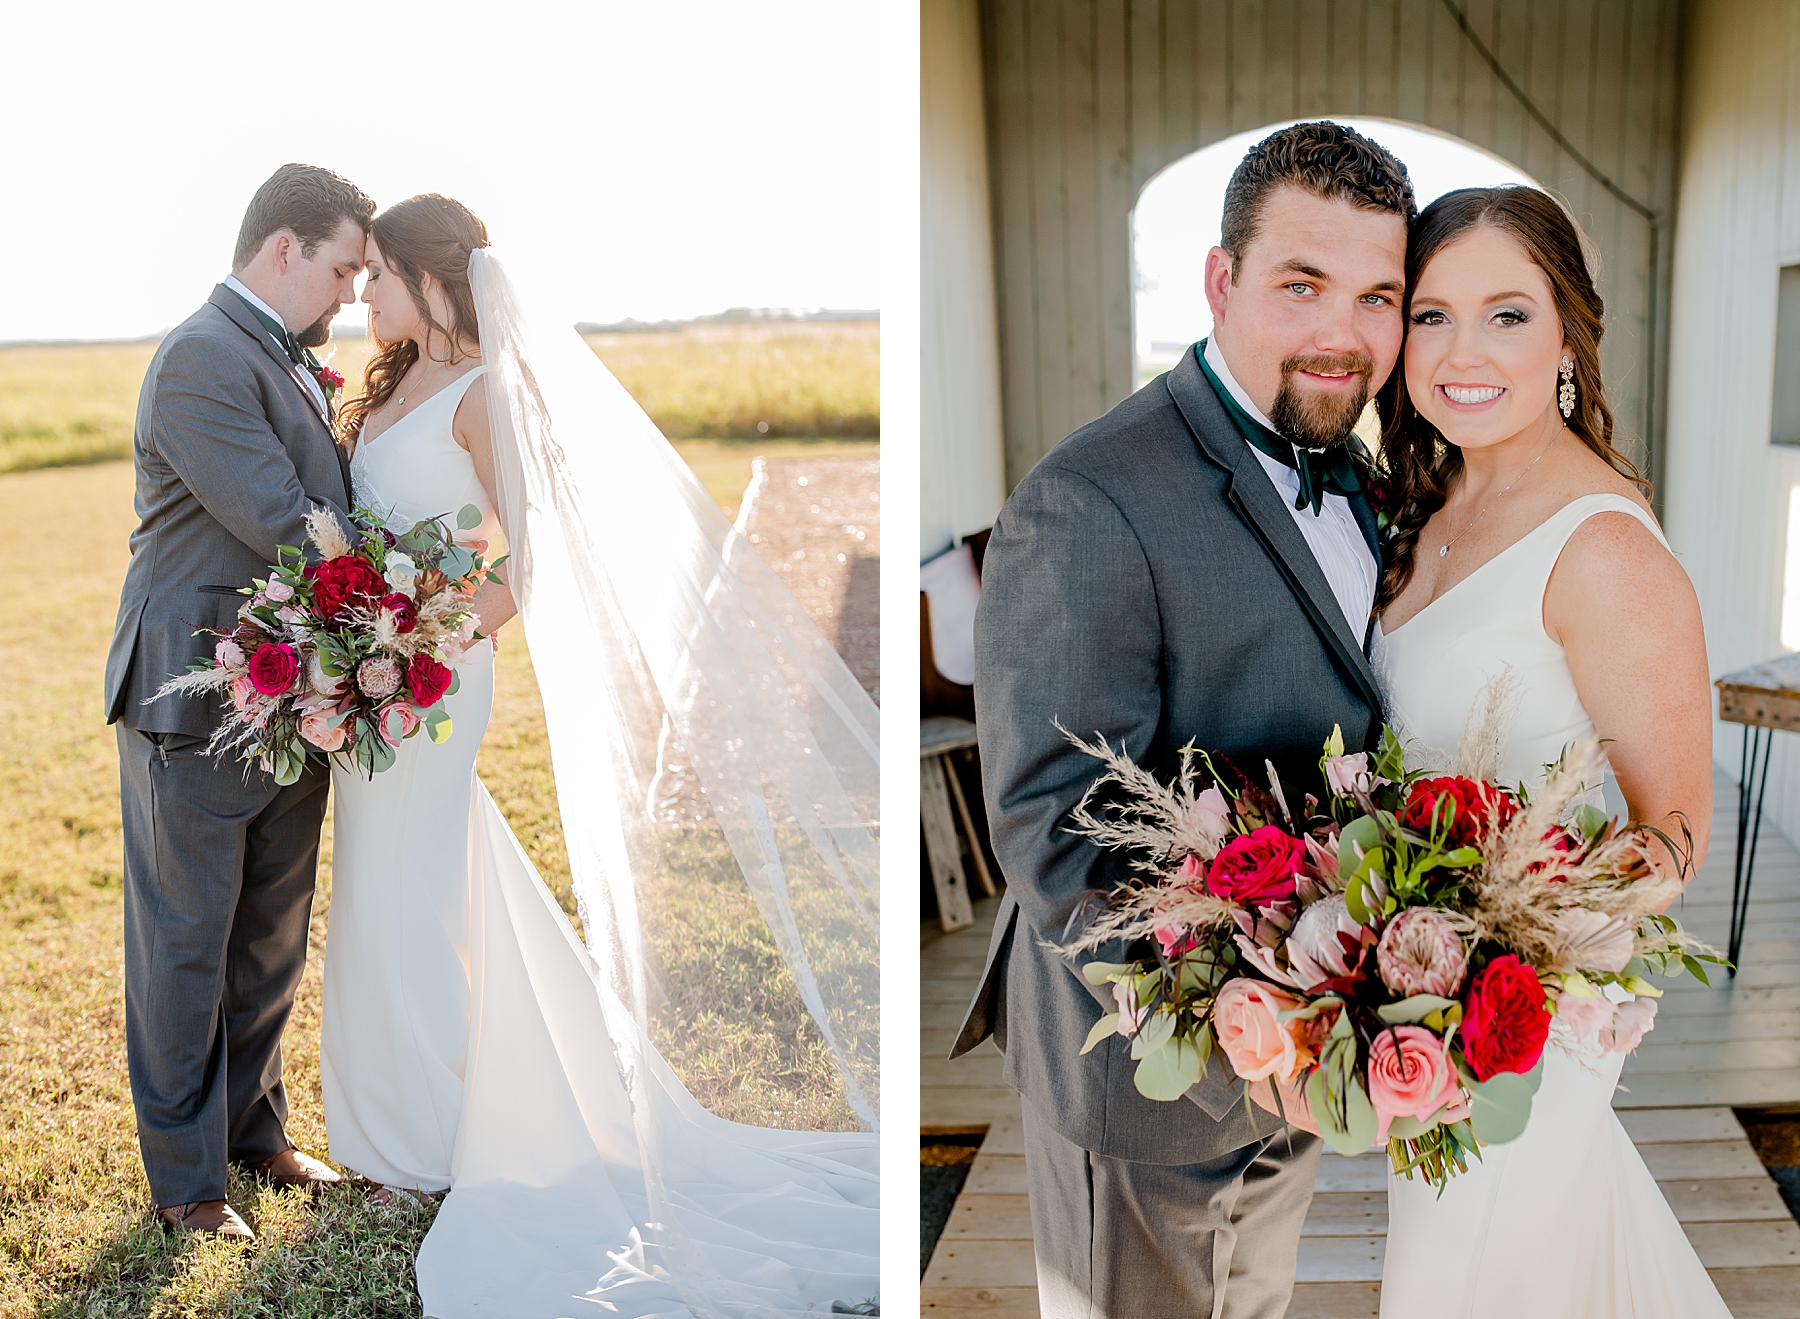 Emerald Green and Jewel-Toned Floral Fall Wedding at The Allen Farmhaus in New Braunfels, Texas | Reiley and Rose | Central Texas Floral Designer | via reileyandrose.com